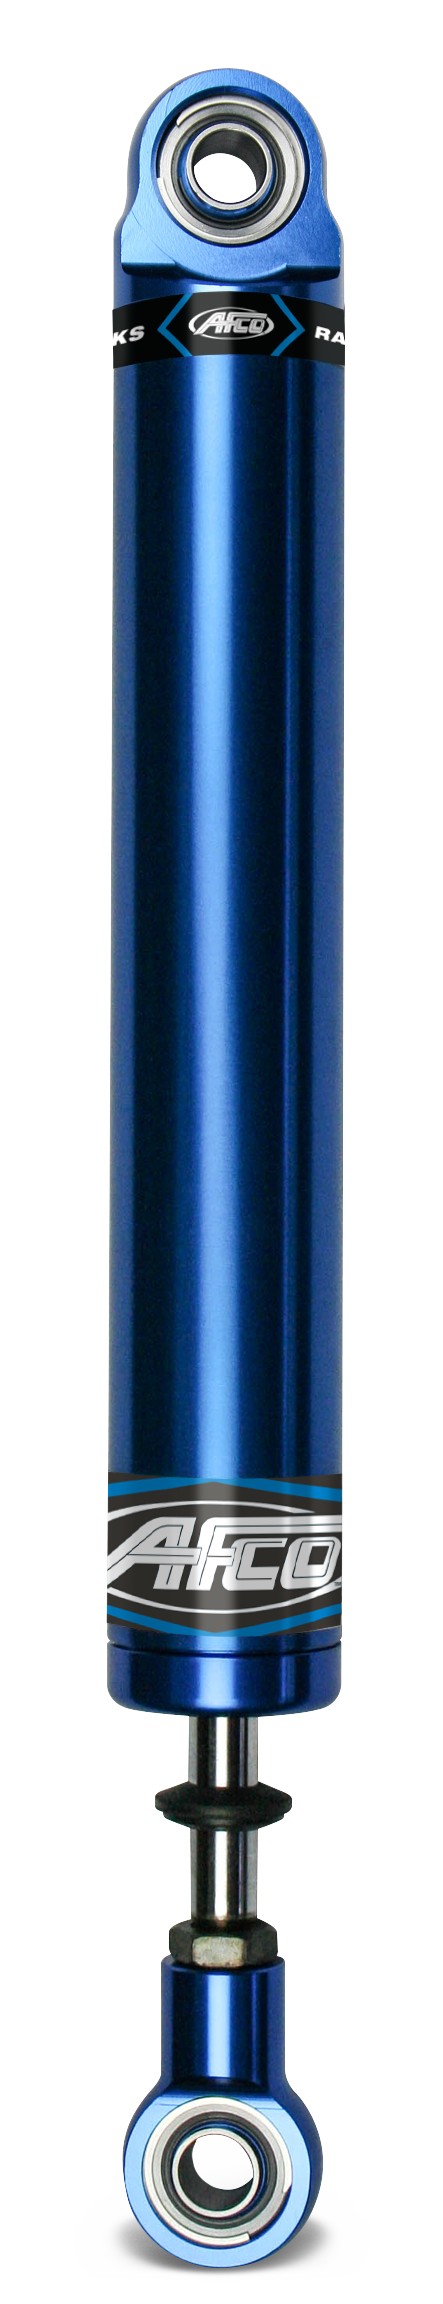 Aluminum Shock Twin Tube 16 Series Small Body 6 Inch Comp 6/Reb 2 Smooth  